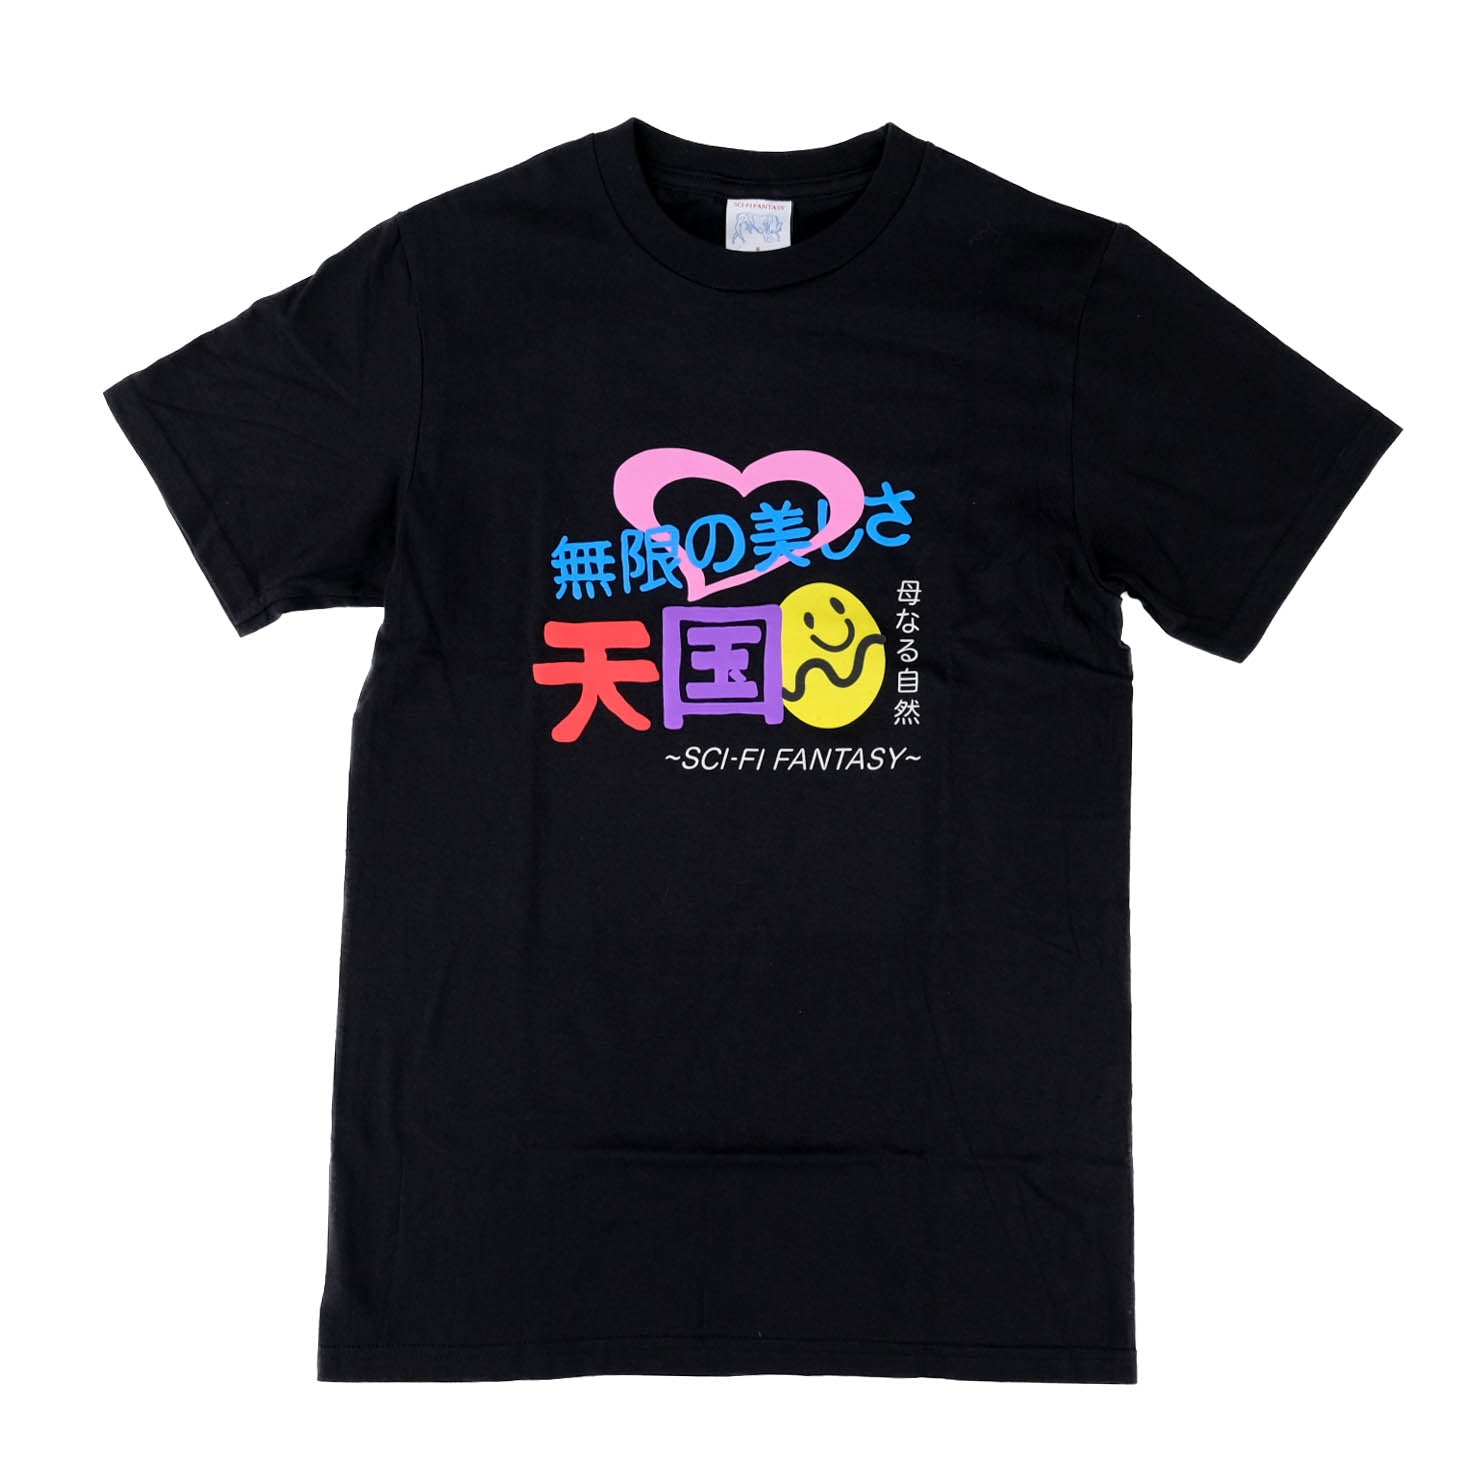 Foreign Figures S/S Tee - Black